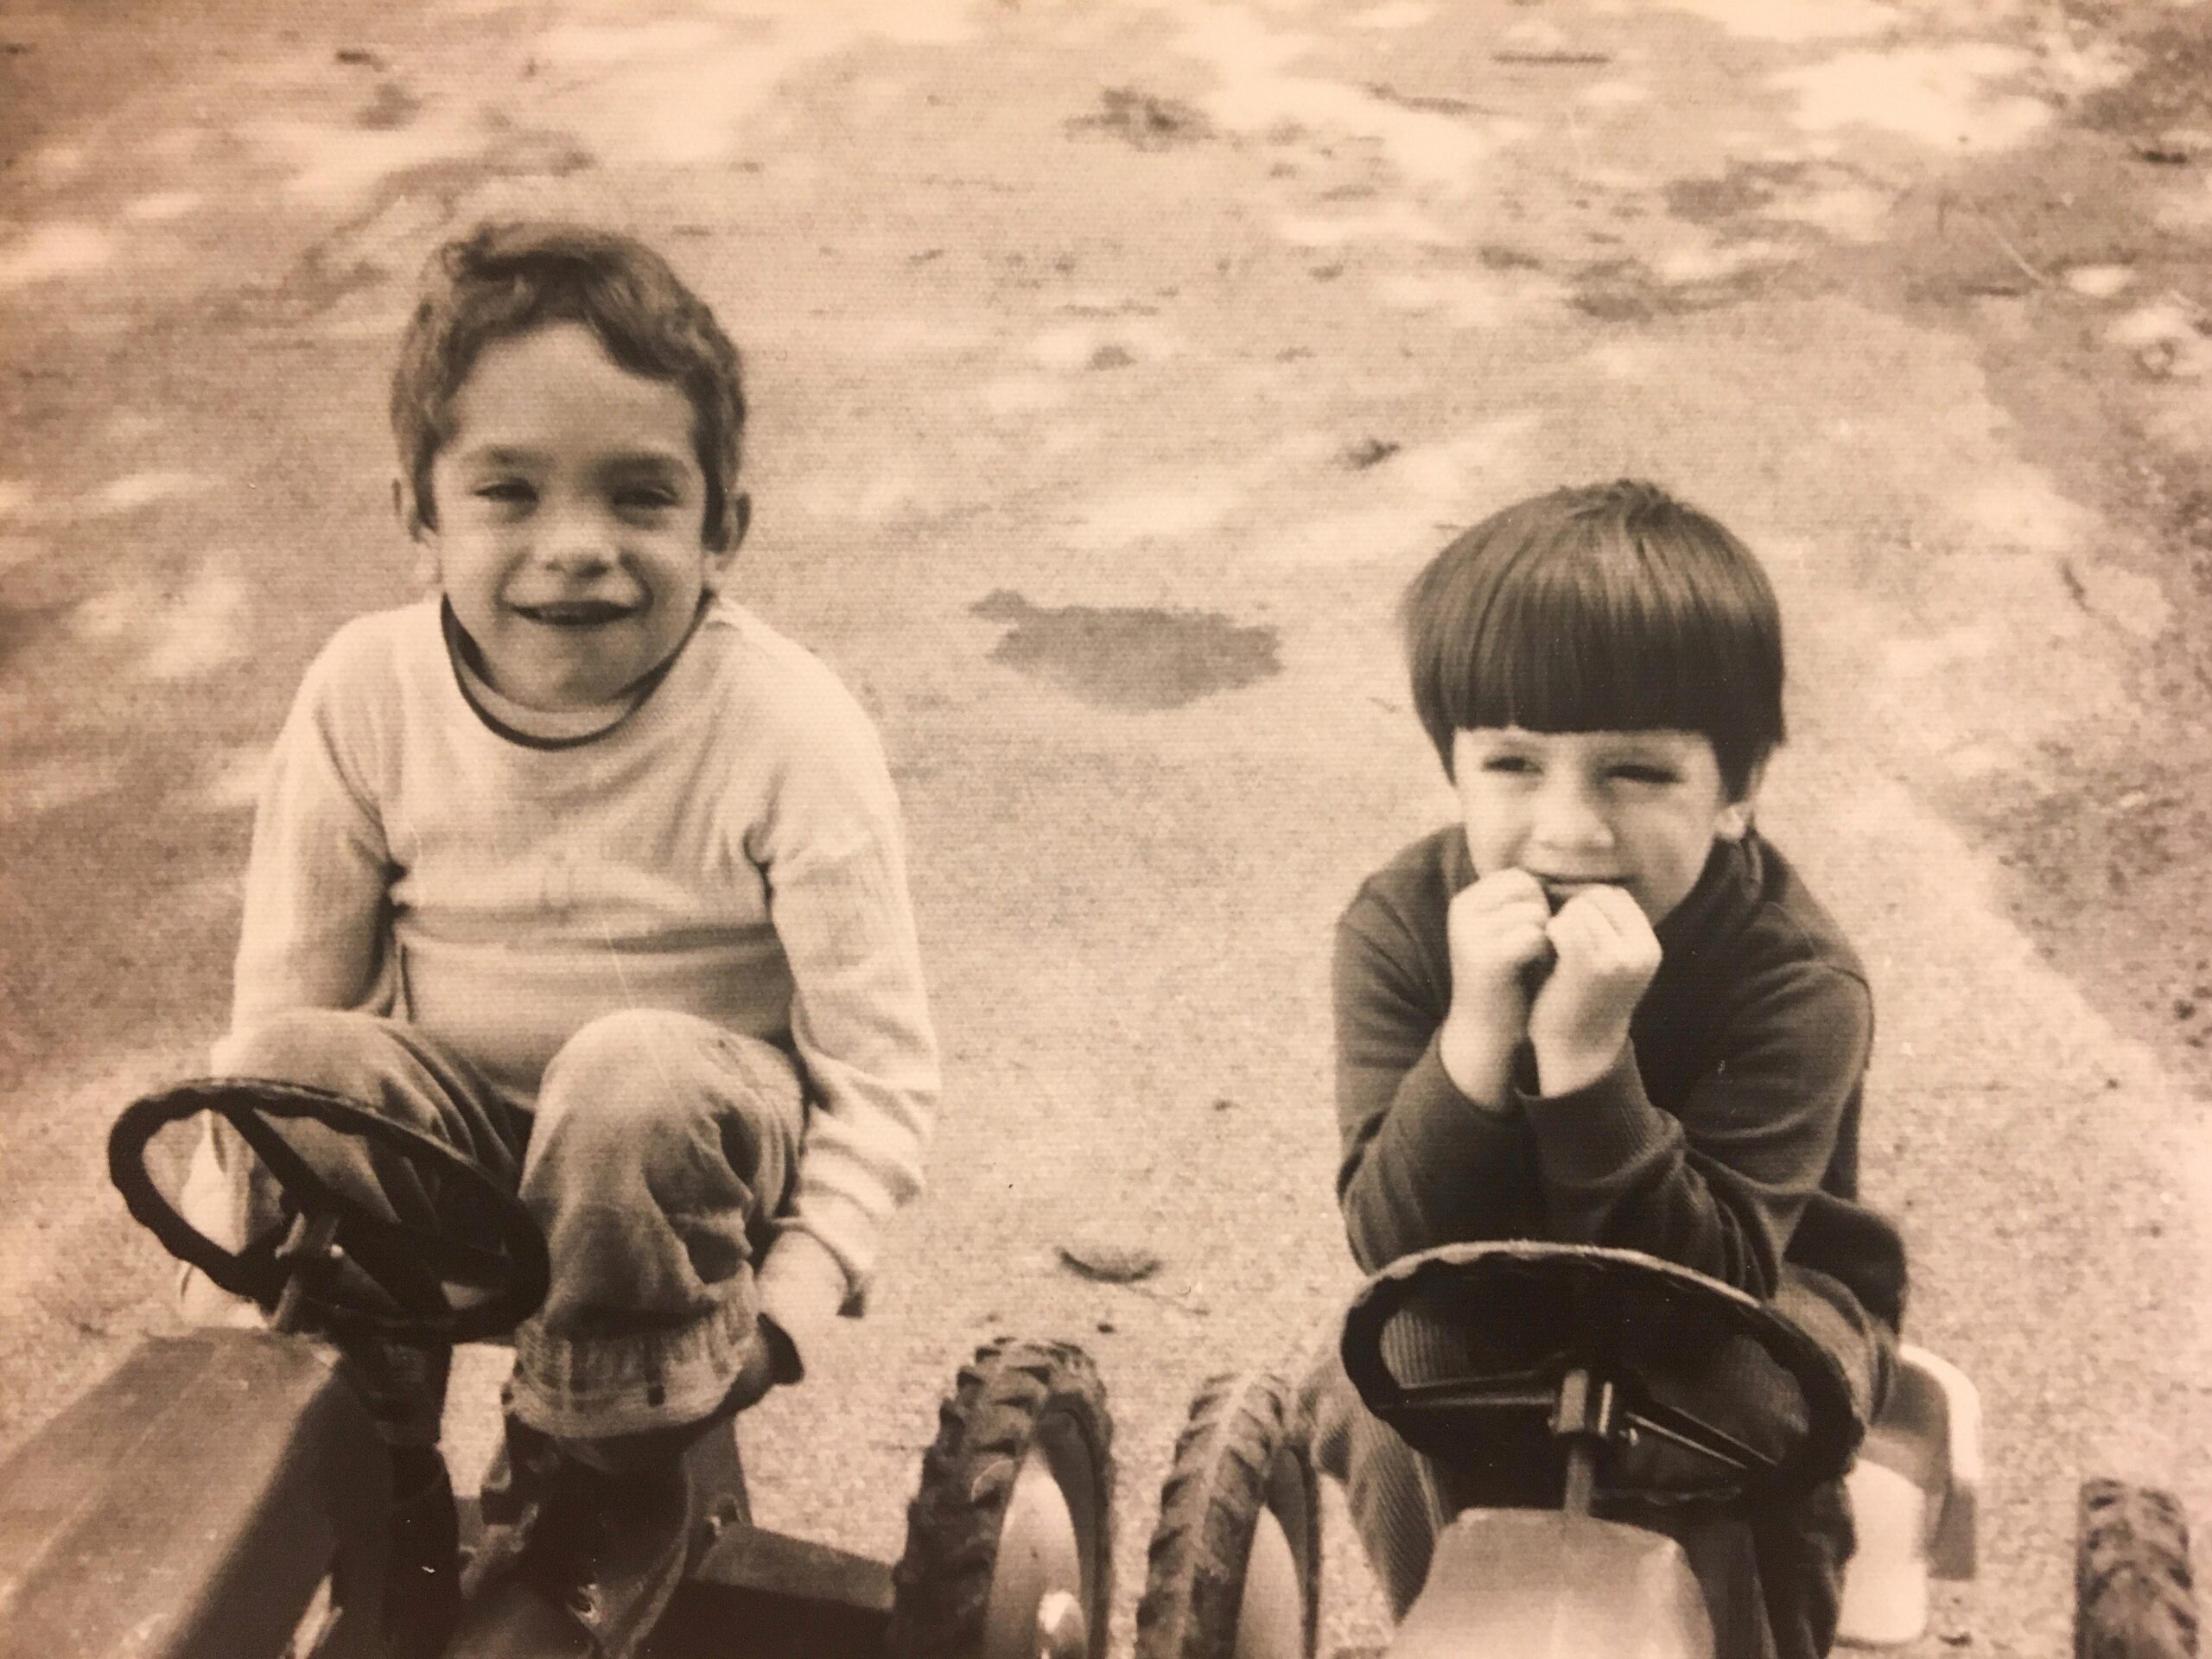 A black and white photo of Jerry and Mike on tricycles when they were little boys smiling at the camera.